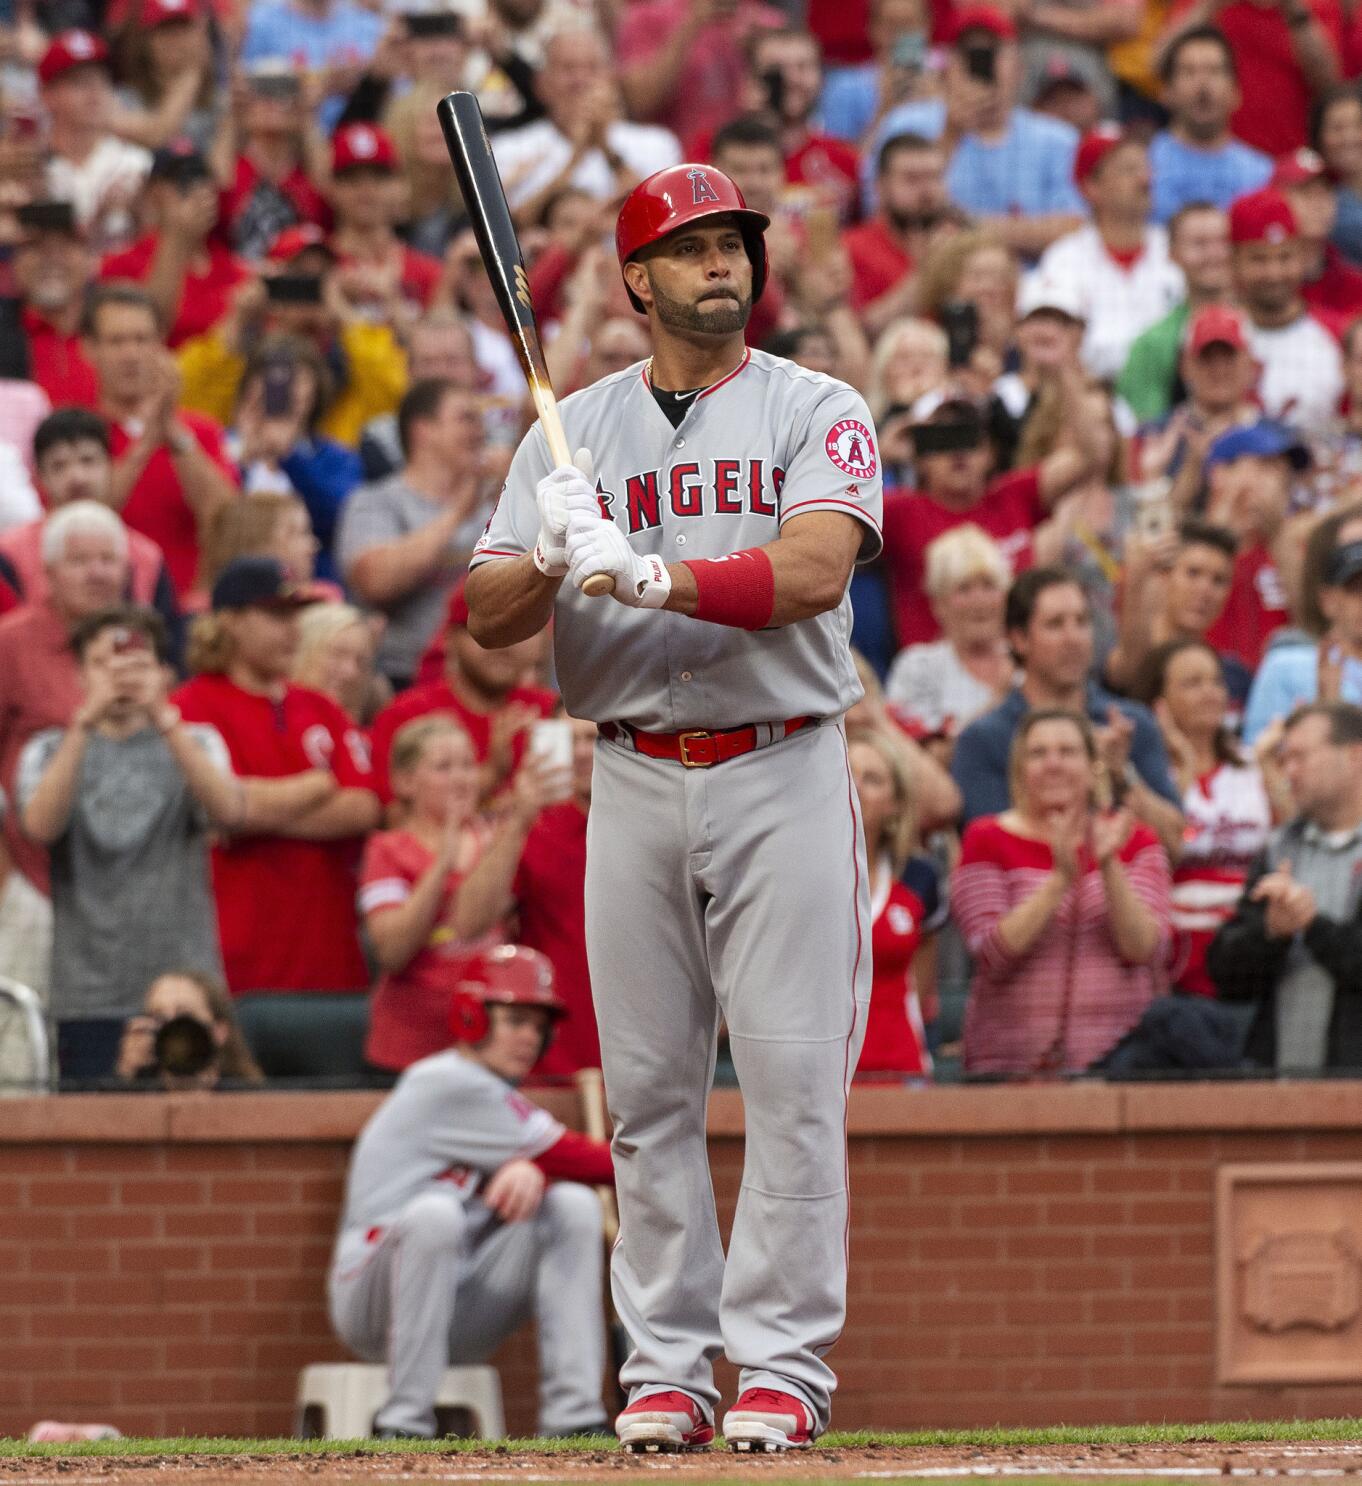 Pujols goes deep in his latest return to St. Louis